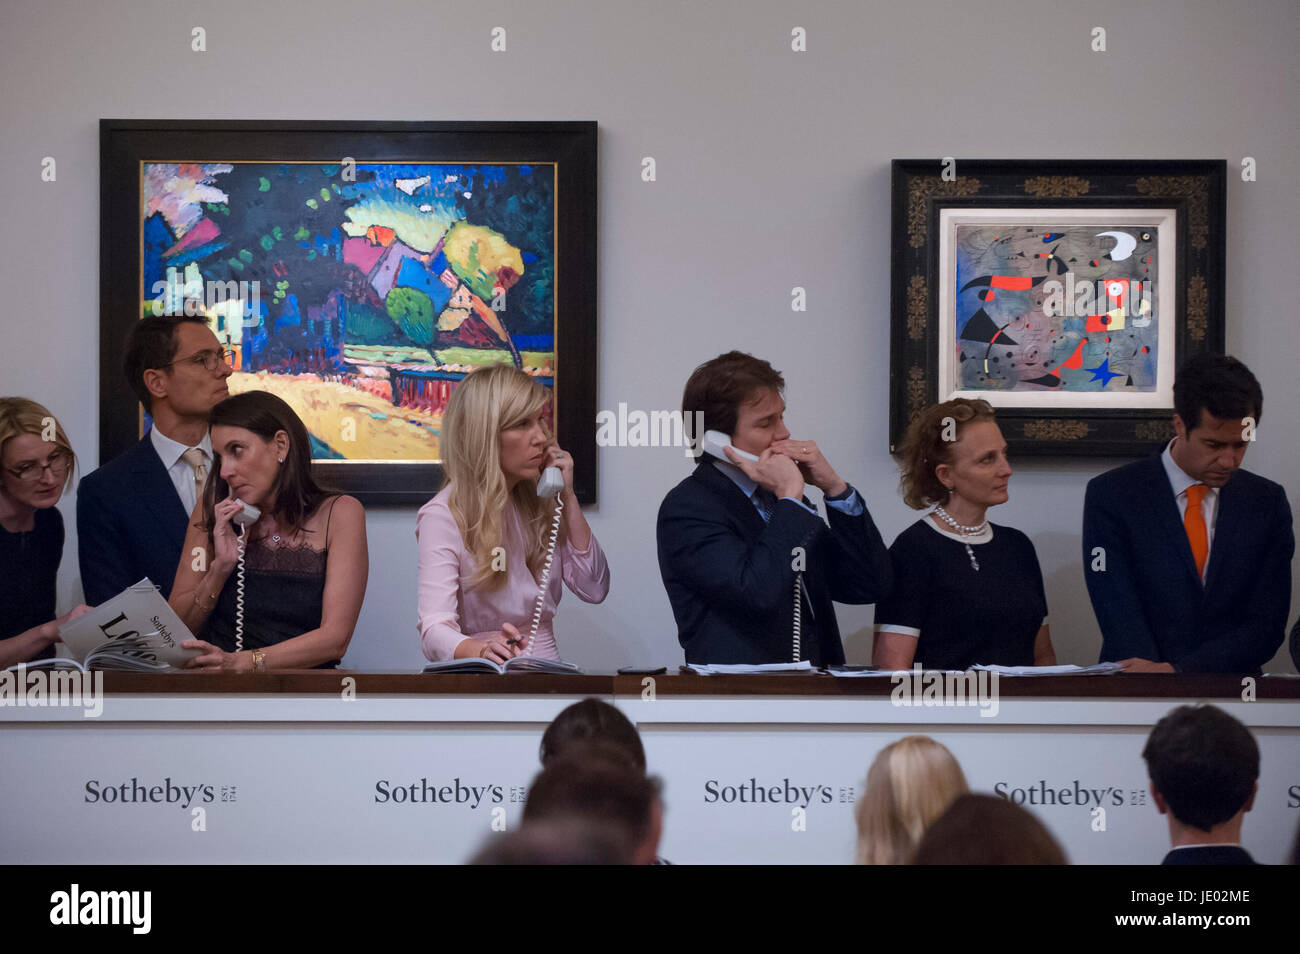 London, UK.  21 June 2017.(L to R) 'Murnau - Landschaft mit grünem Haus', 1909, by Wassily Kandinsky sold for a hammer price of GBP18.5m (estimate GBP15-25m) and 'Femme et oiseaux', 1940, by Joan Miró sold for a hammer price of GBP21.7m (estimate > USD30m) at Sotheby's Impressionist and Modern Art evening sale in New Bond Street. Credit: Stephen Chung / Alamy Live News Stock Photo